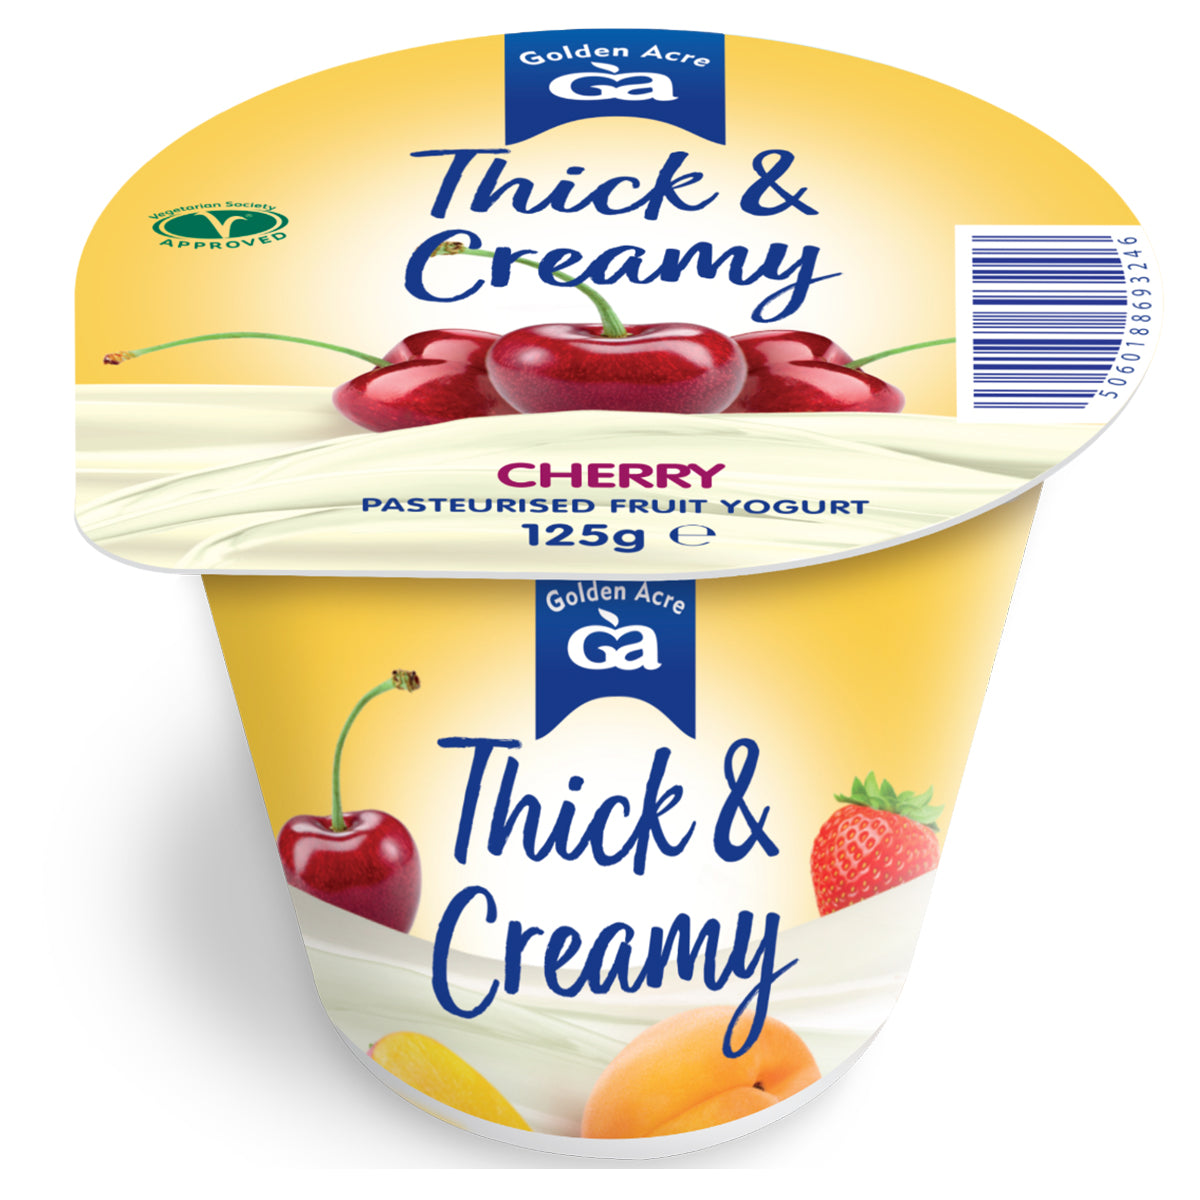 A cup of Golden Acre - Thick & Creamy Cherry Yoghurt - 150g.